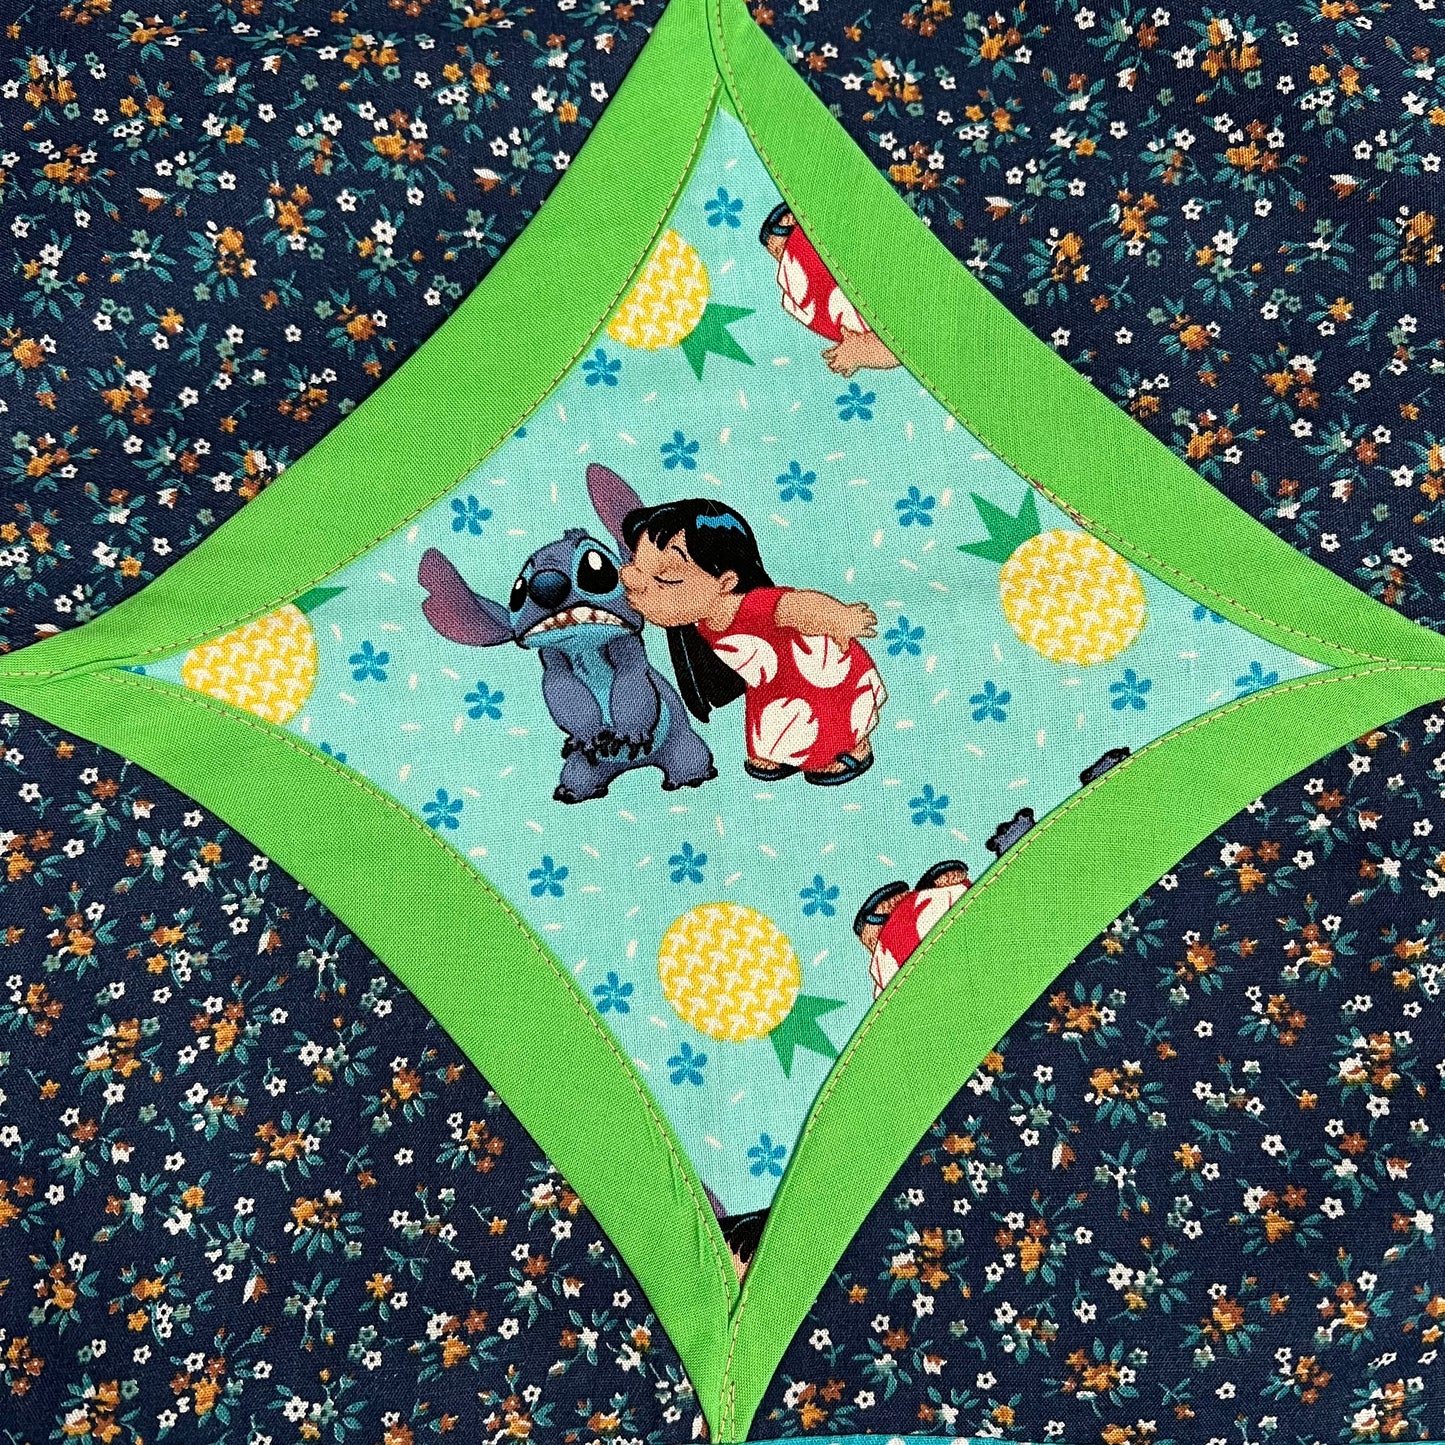 Lilo and Stitch fabric square, surrounded by neon green and then dark navy floral fabrics